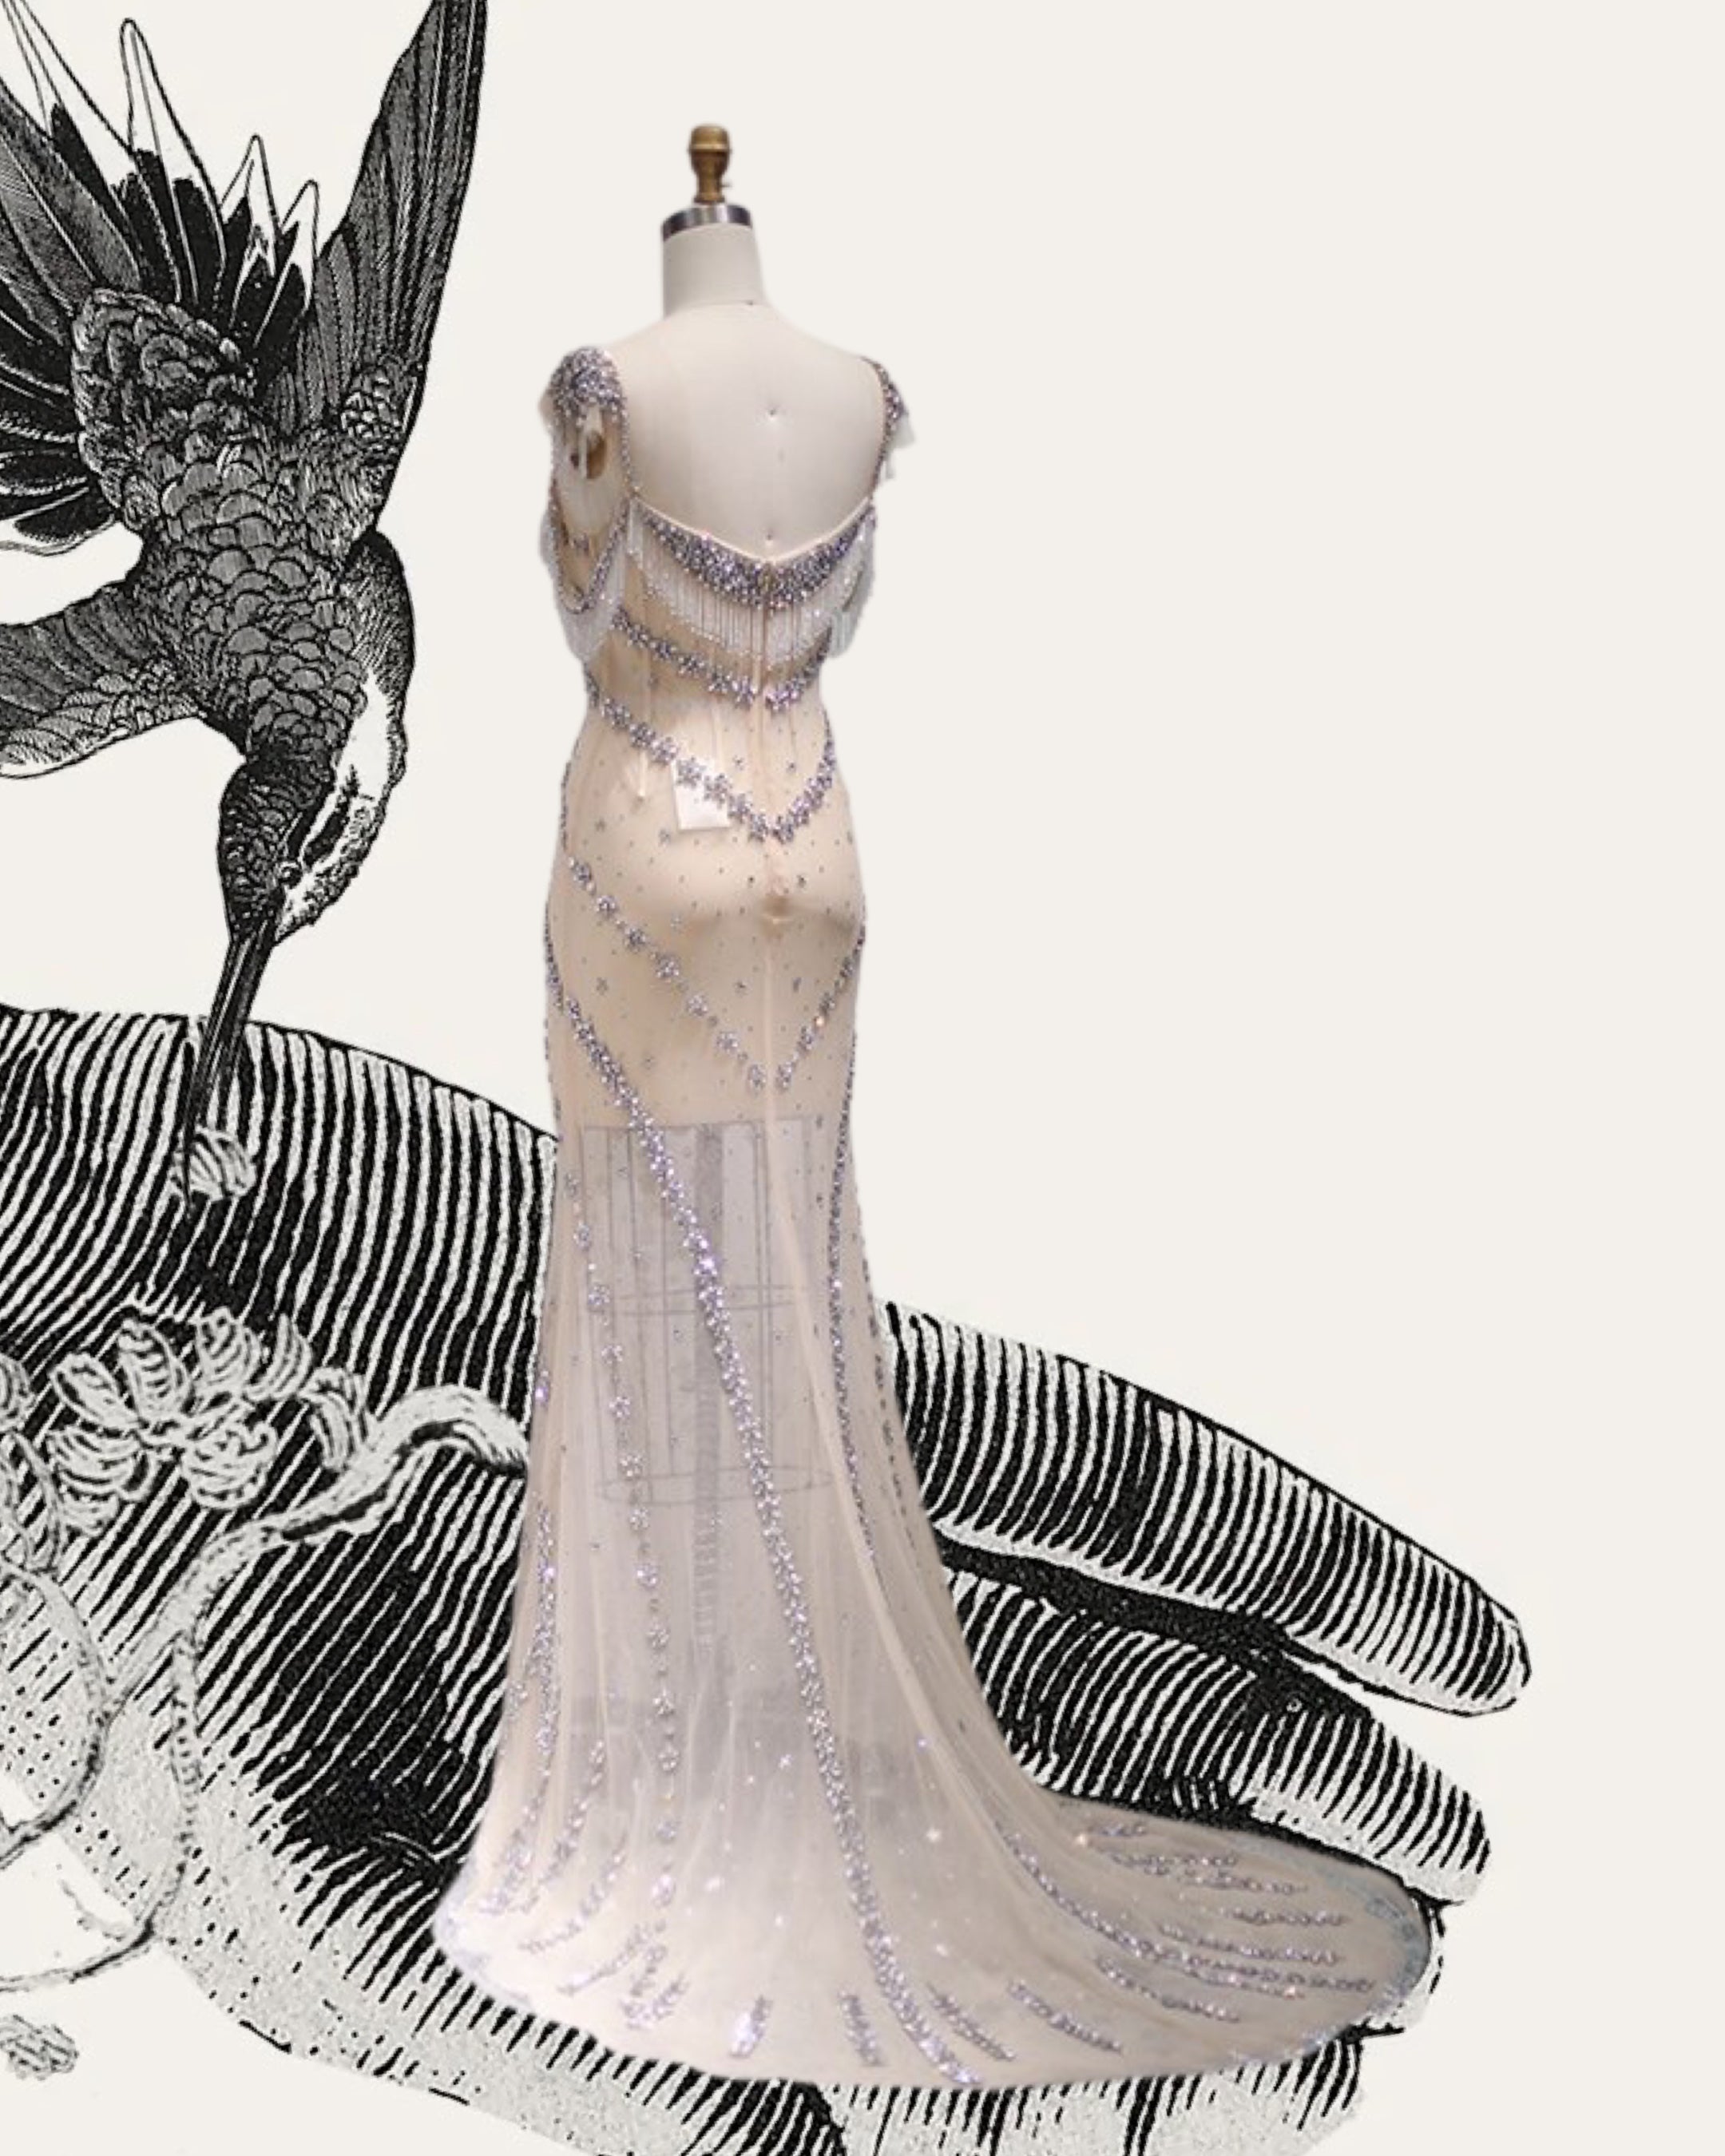 Couture Style Kendall Jenner Evening Dress in Nude pink Lining or Sheer With hand Embellished Crystals ~ KAY